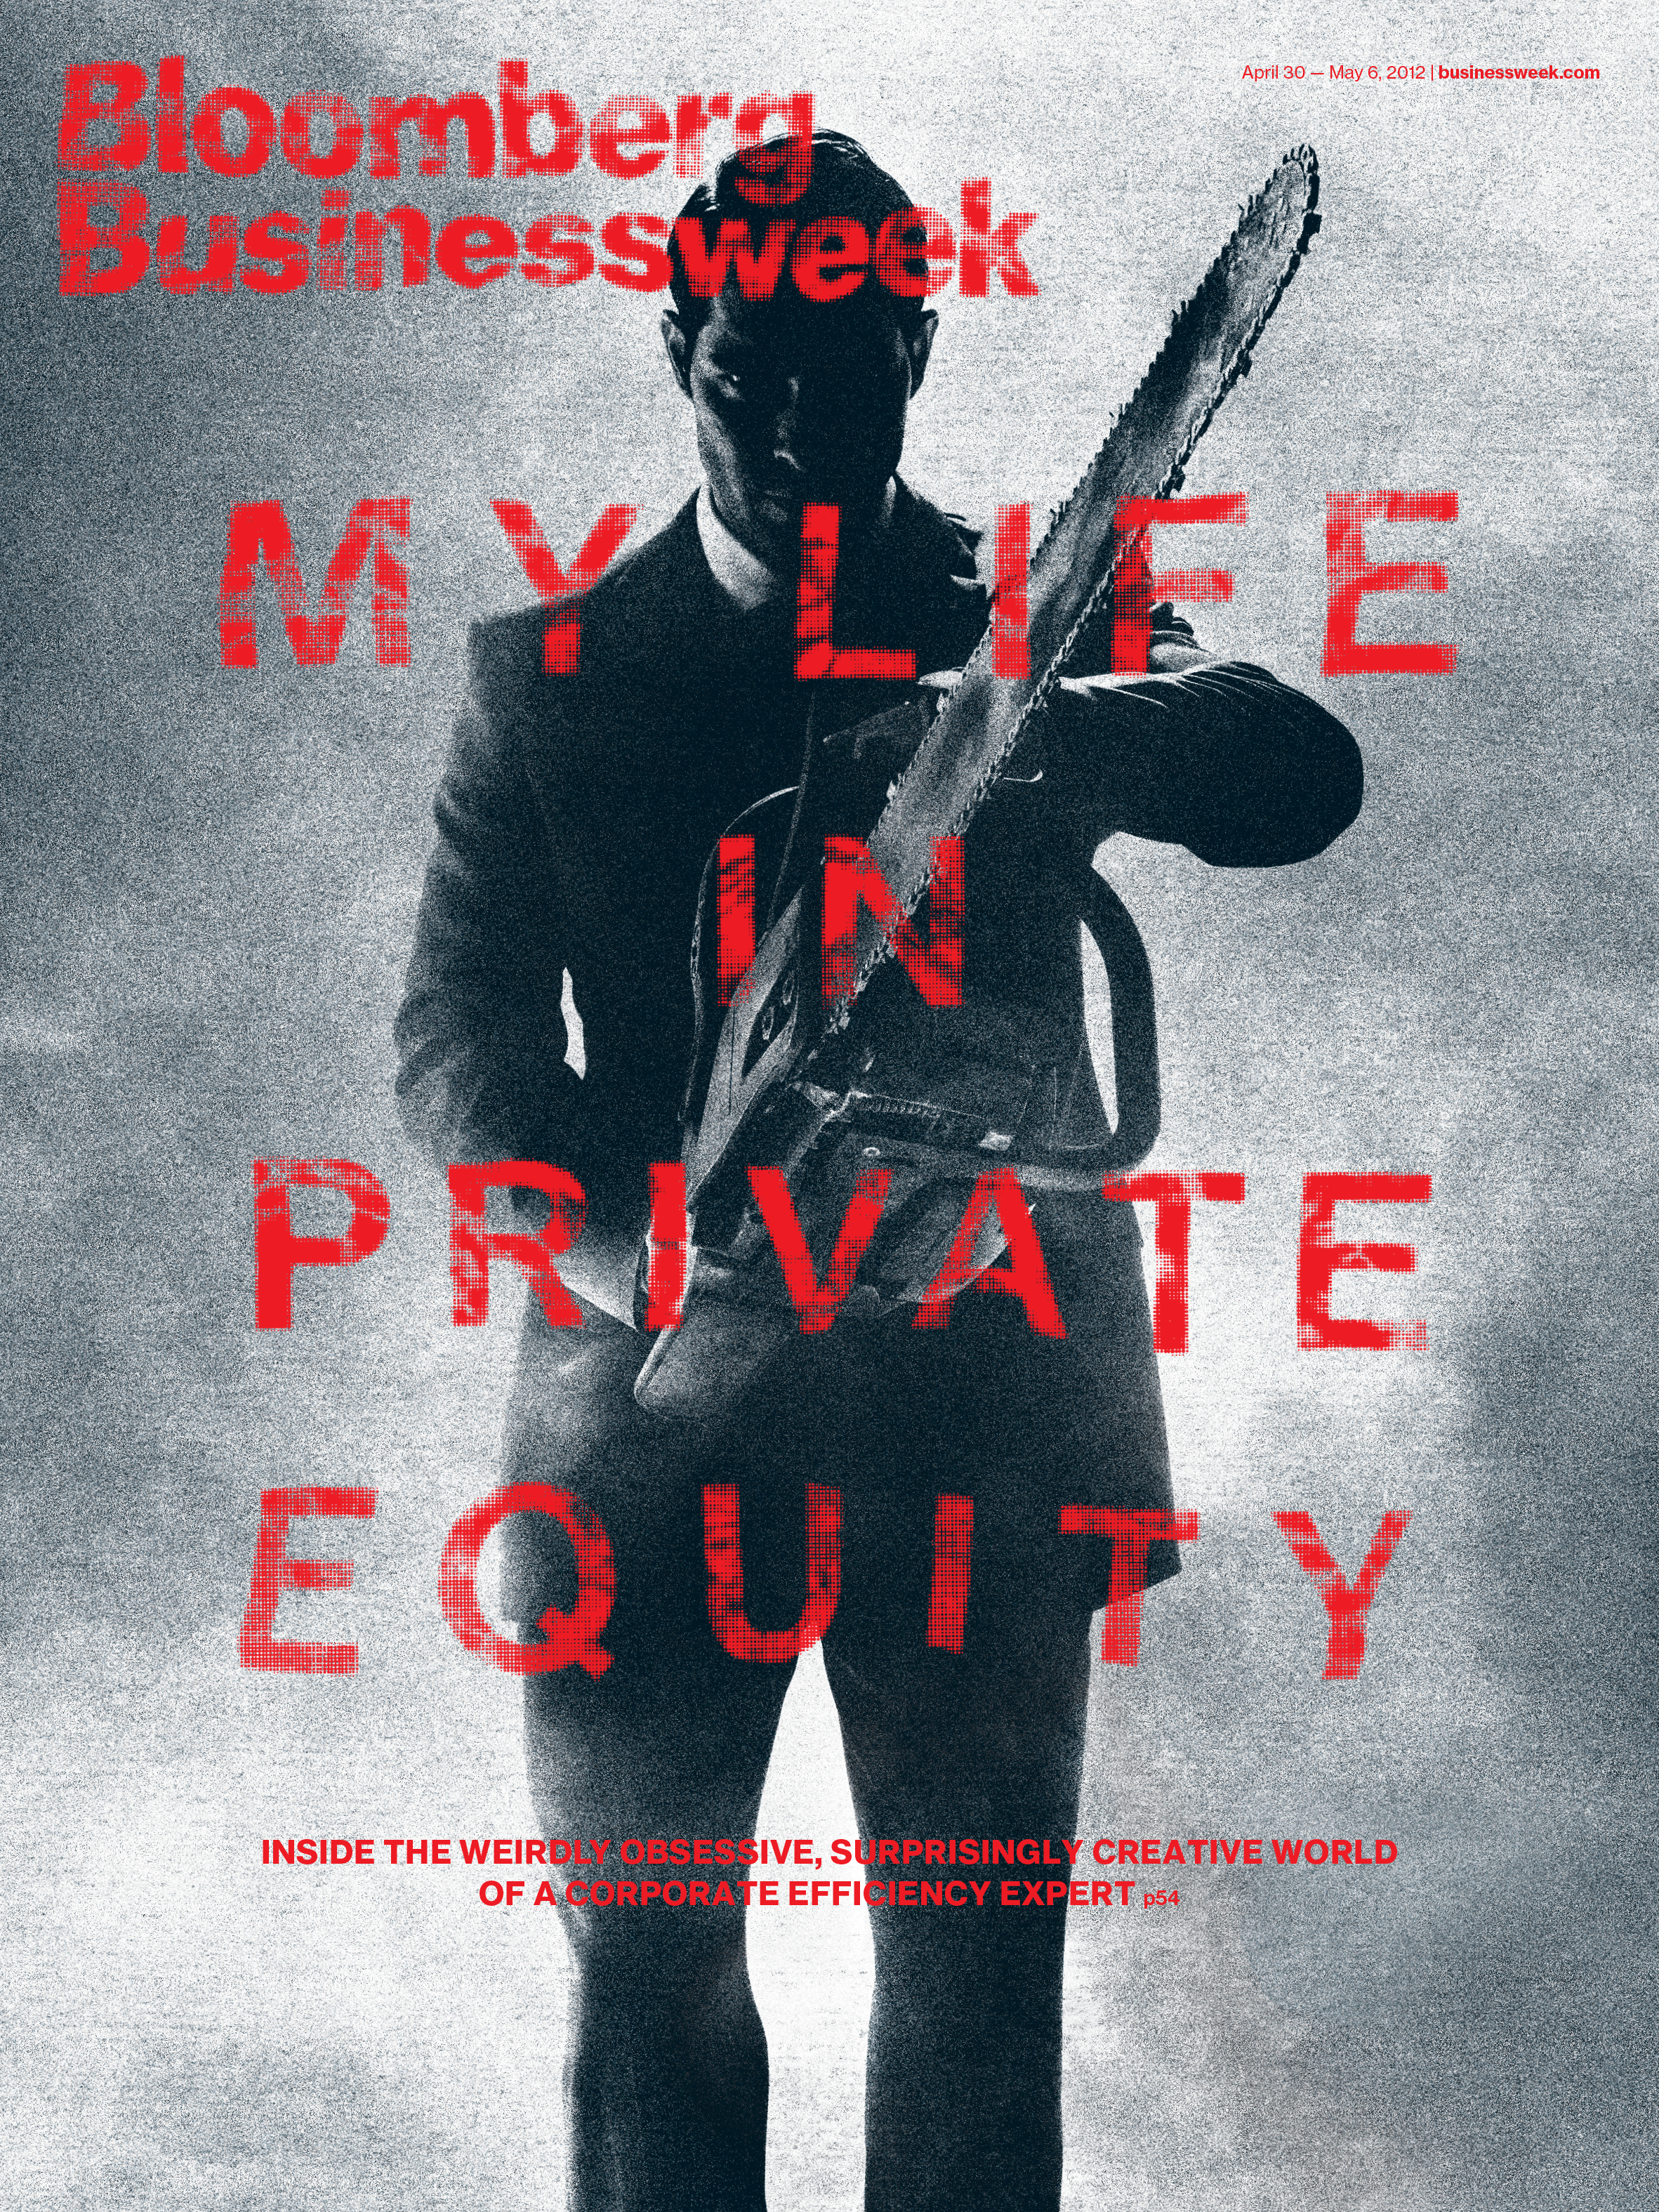 Bloomberg Businessweek-April 30-May 6, 2012 "My Life in Private Equity"